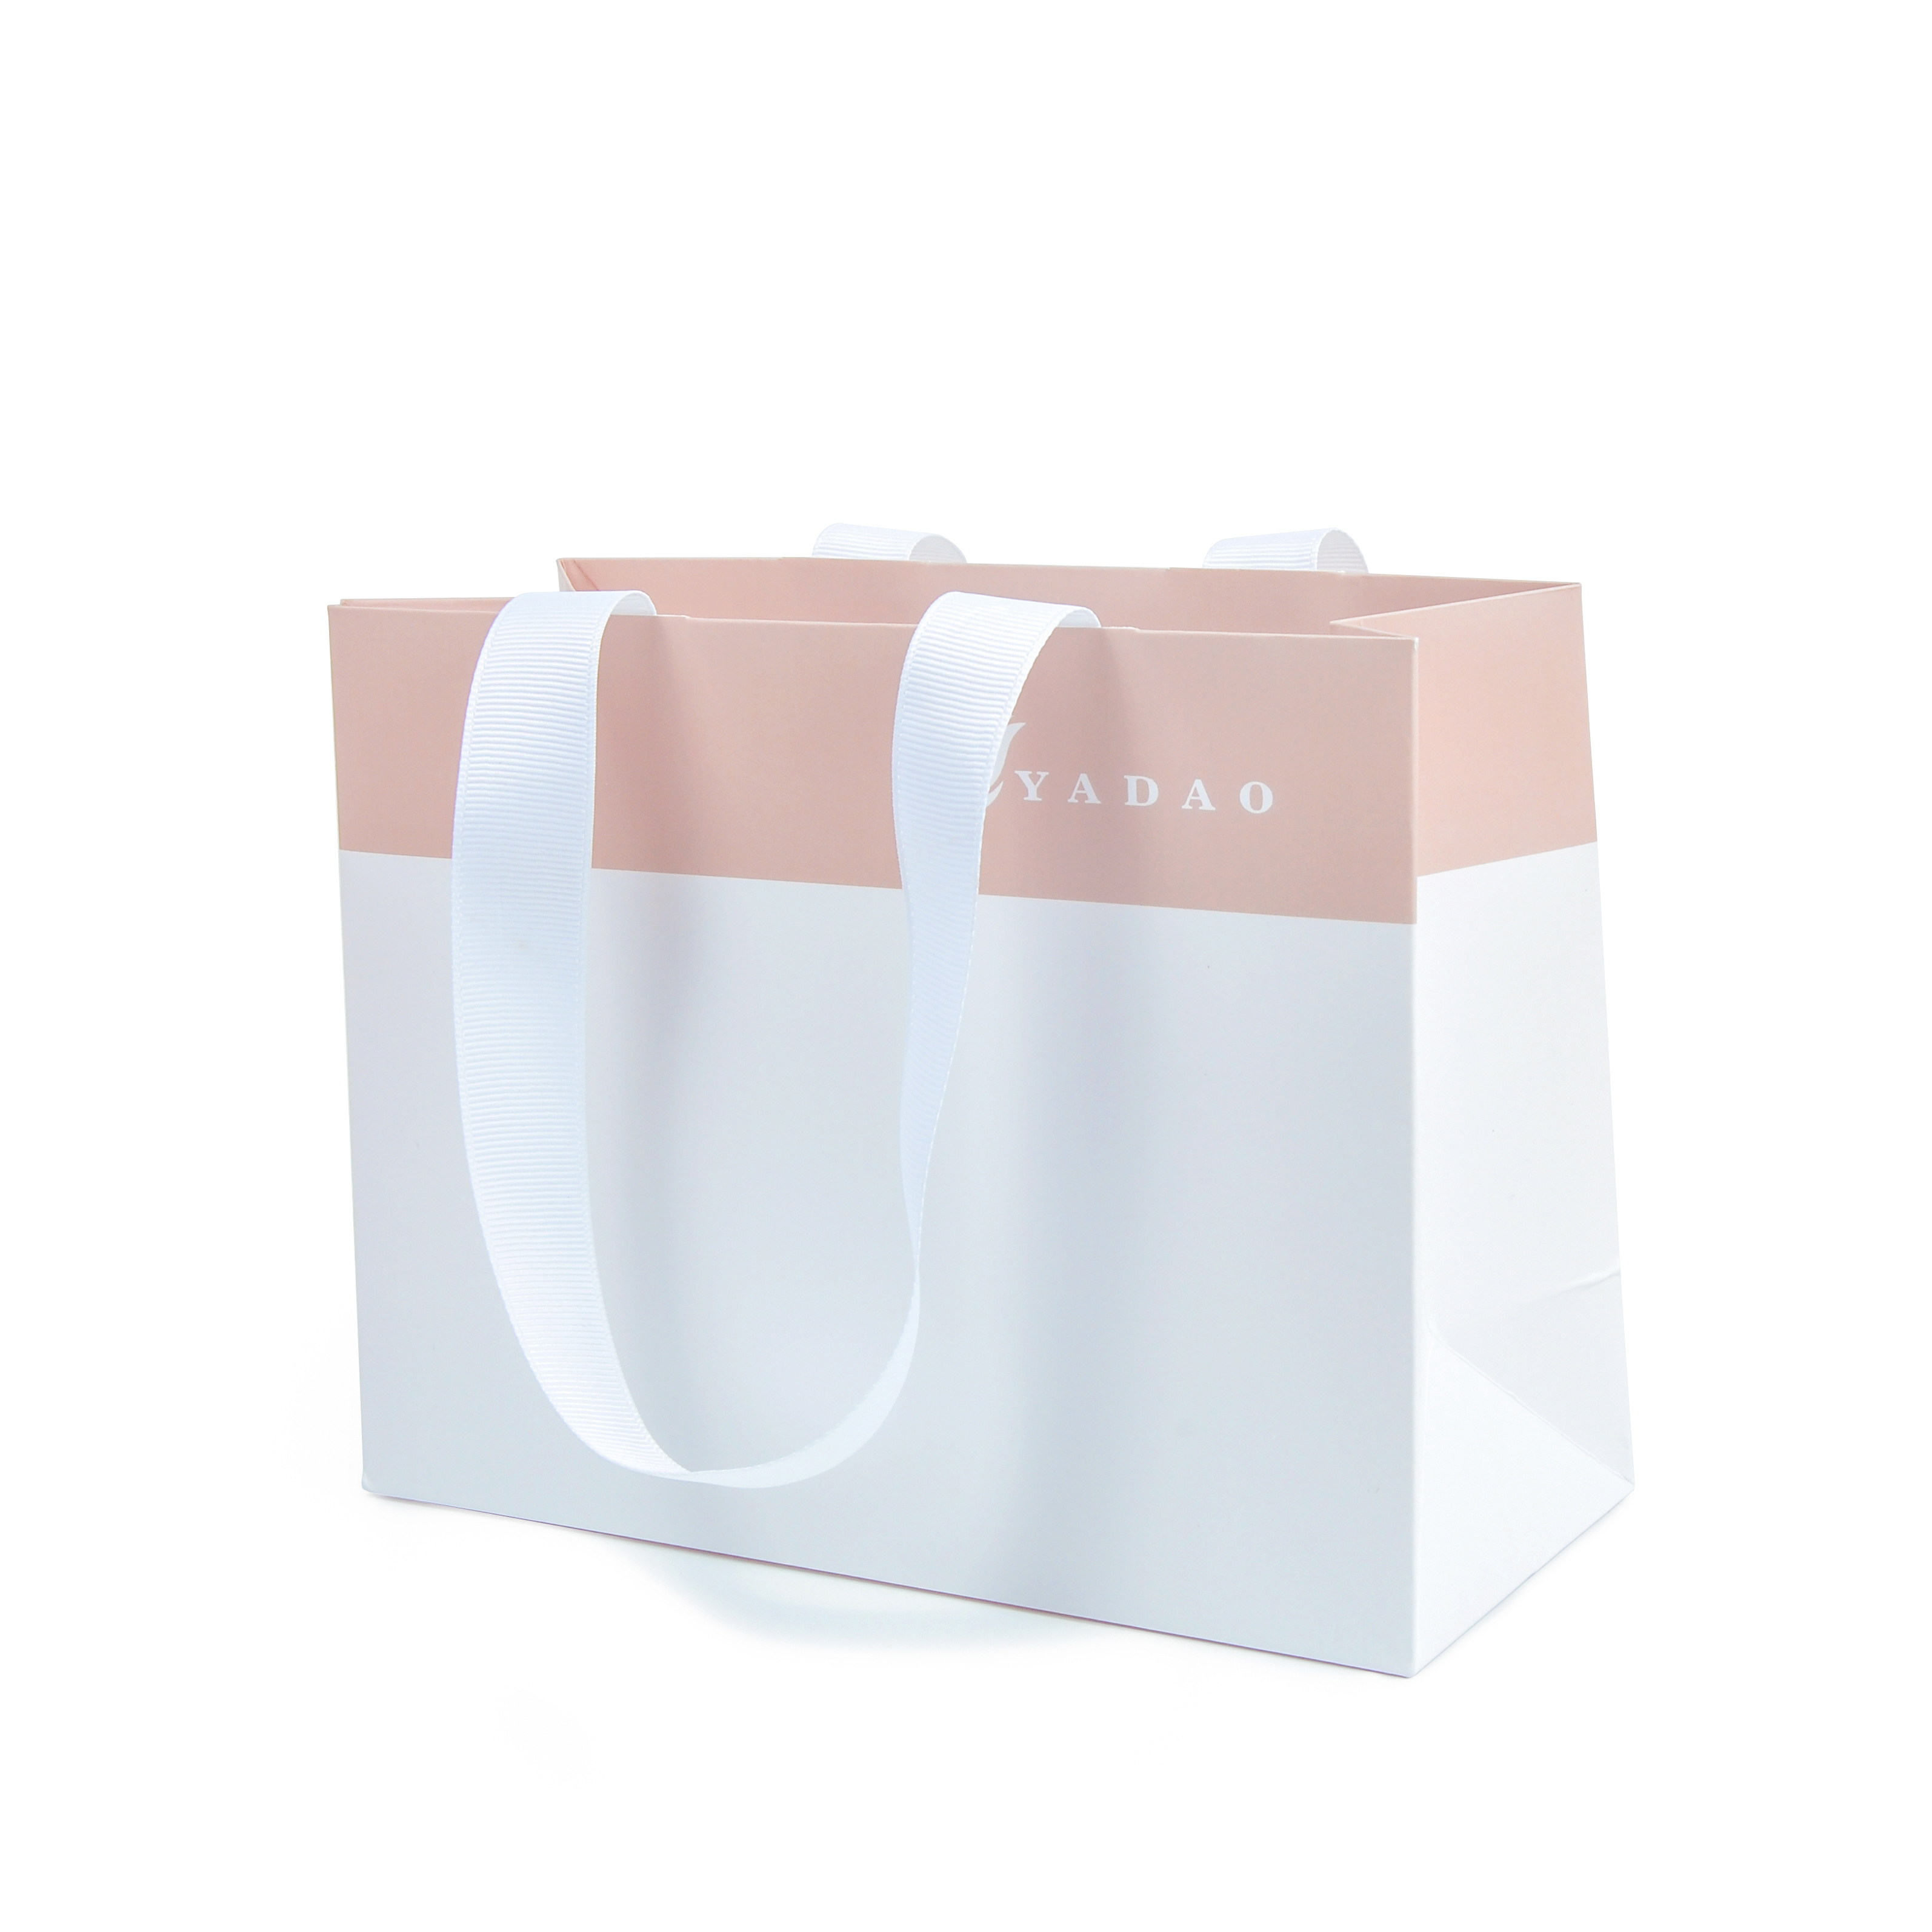 Yadao customized jewelry packaging bag shopping gift bag with printing Logo and ribbon handle